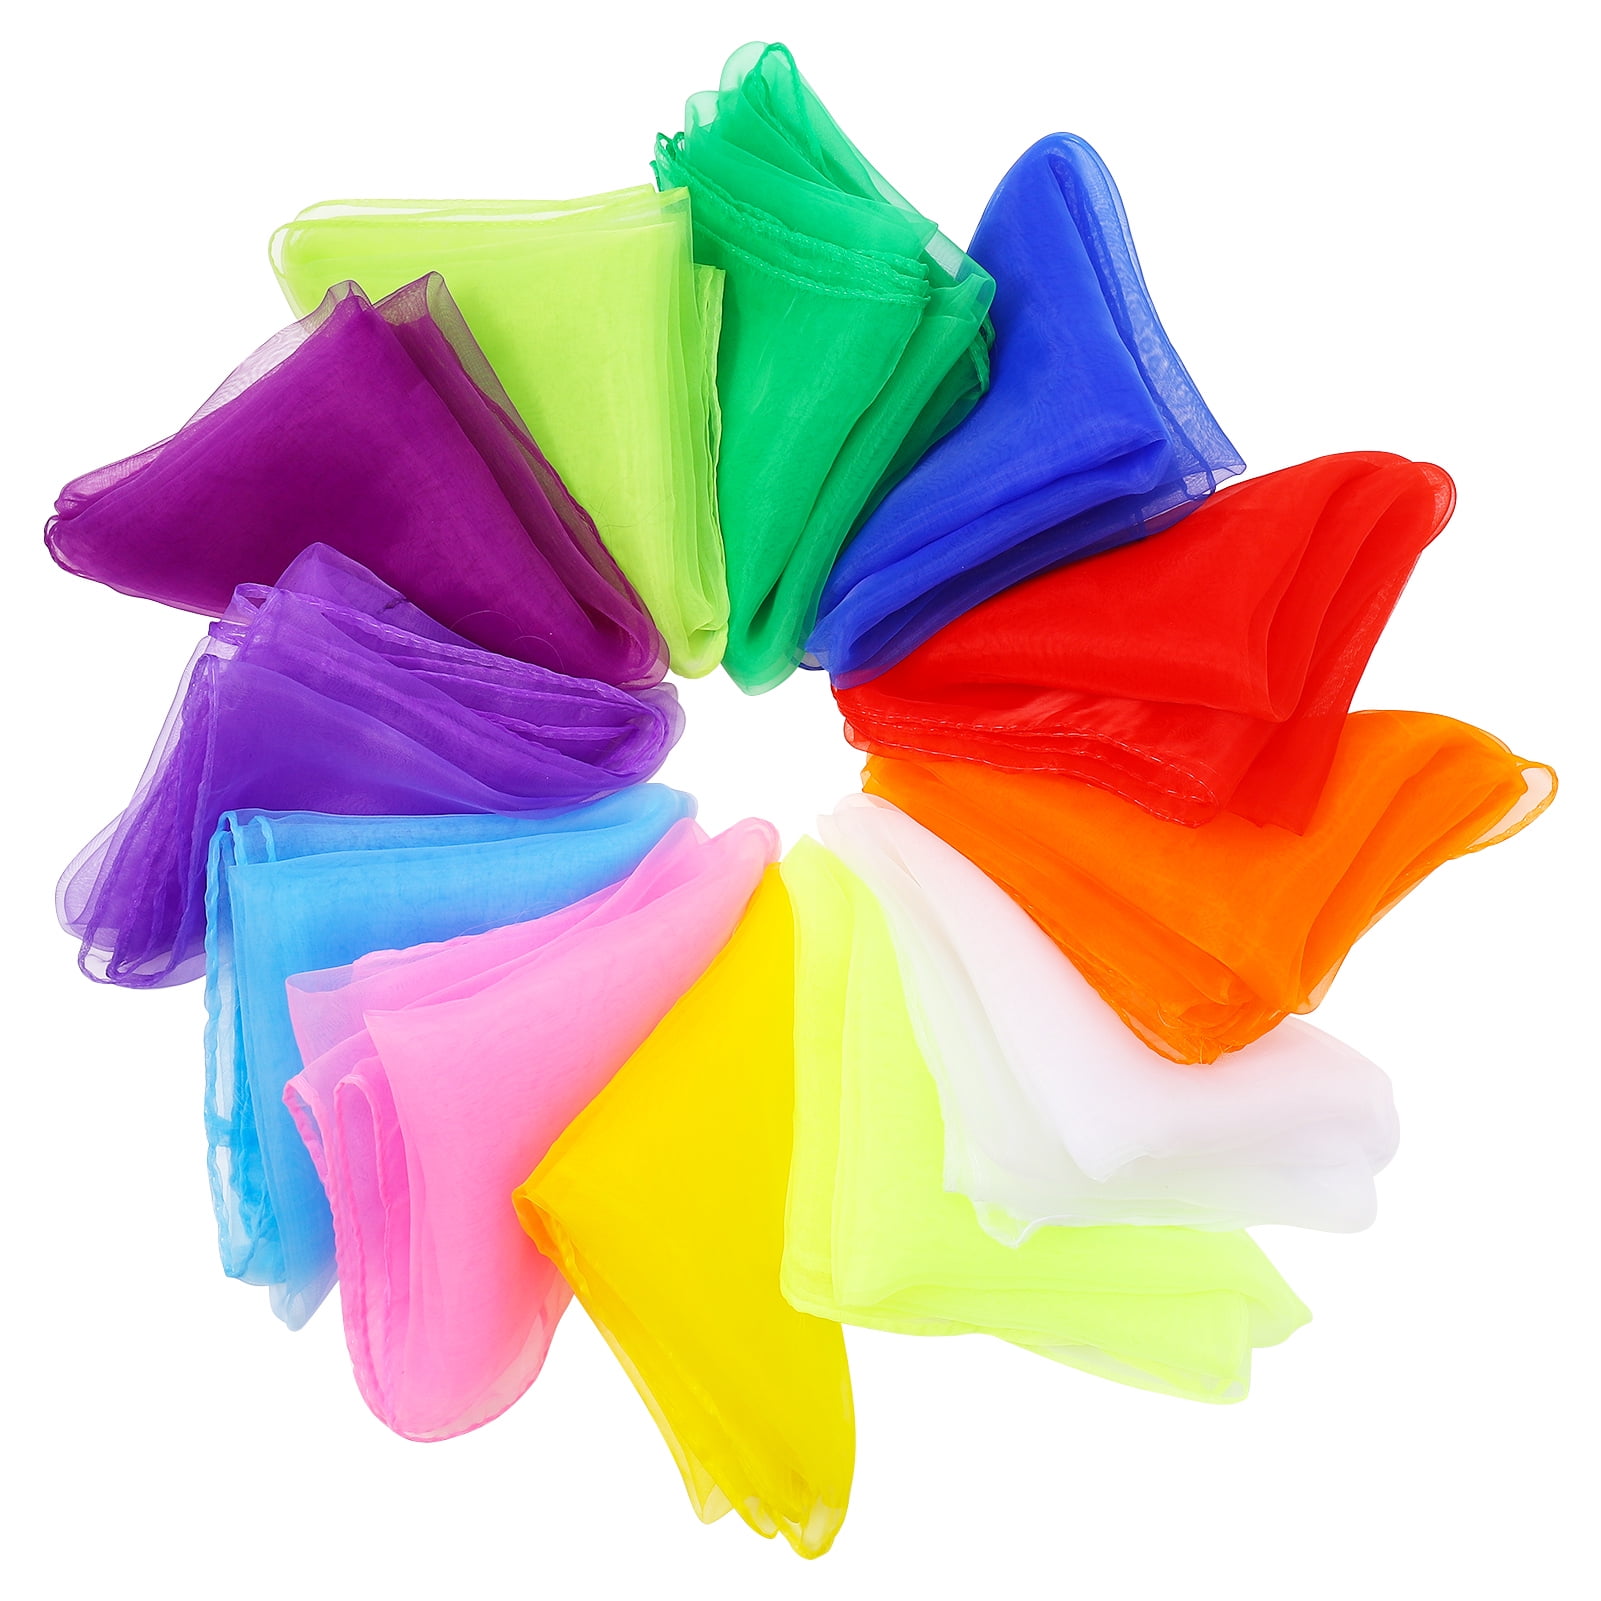  HEQU Square Dance Scarves, 16 Pcs Play Scarves, Juggling Scarf  Silk Scarves Performance Props Accessories, Music Movement Scarf for Kids(8  Colors,24 x 24)(16pcs) : Toys & Games